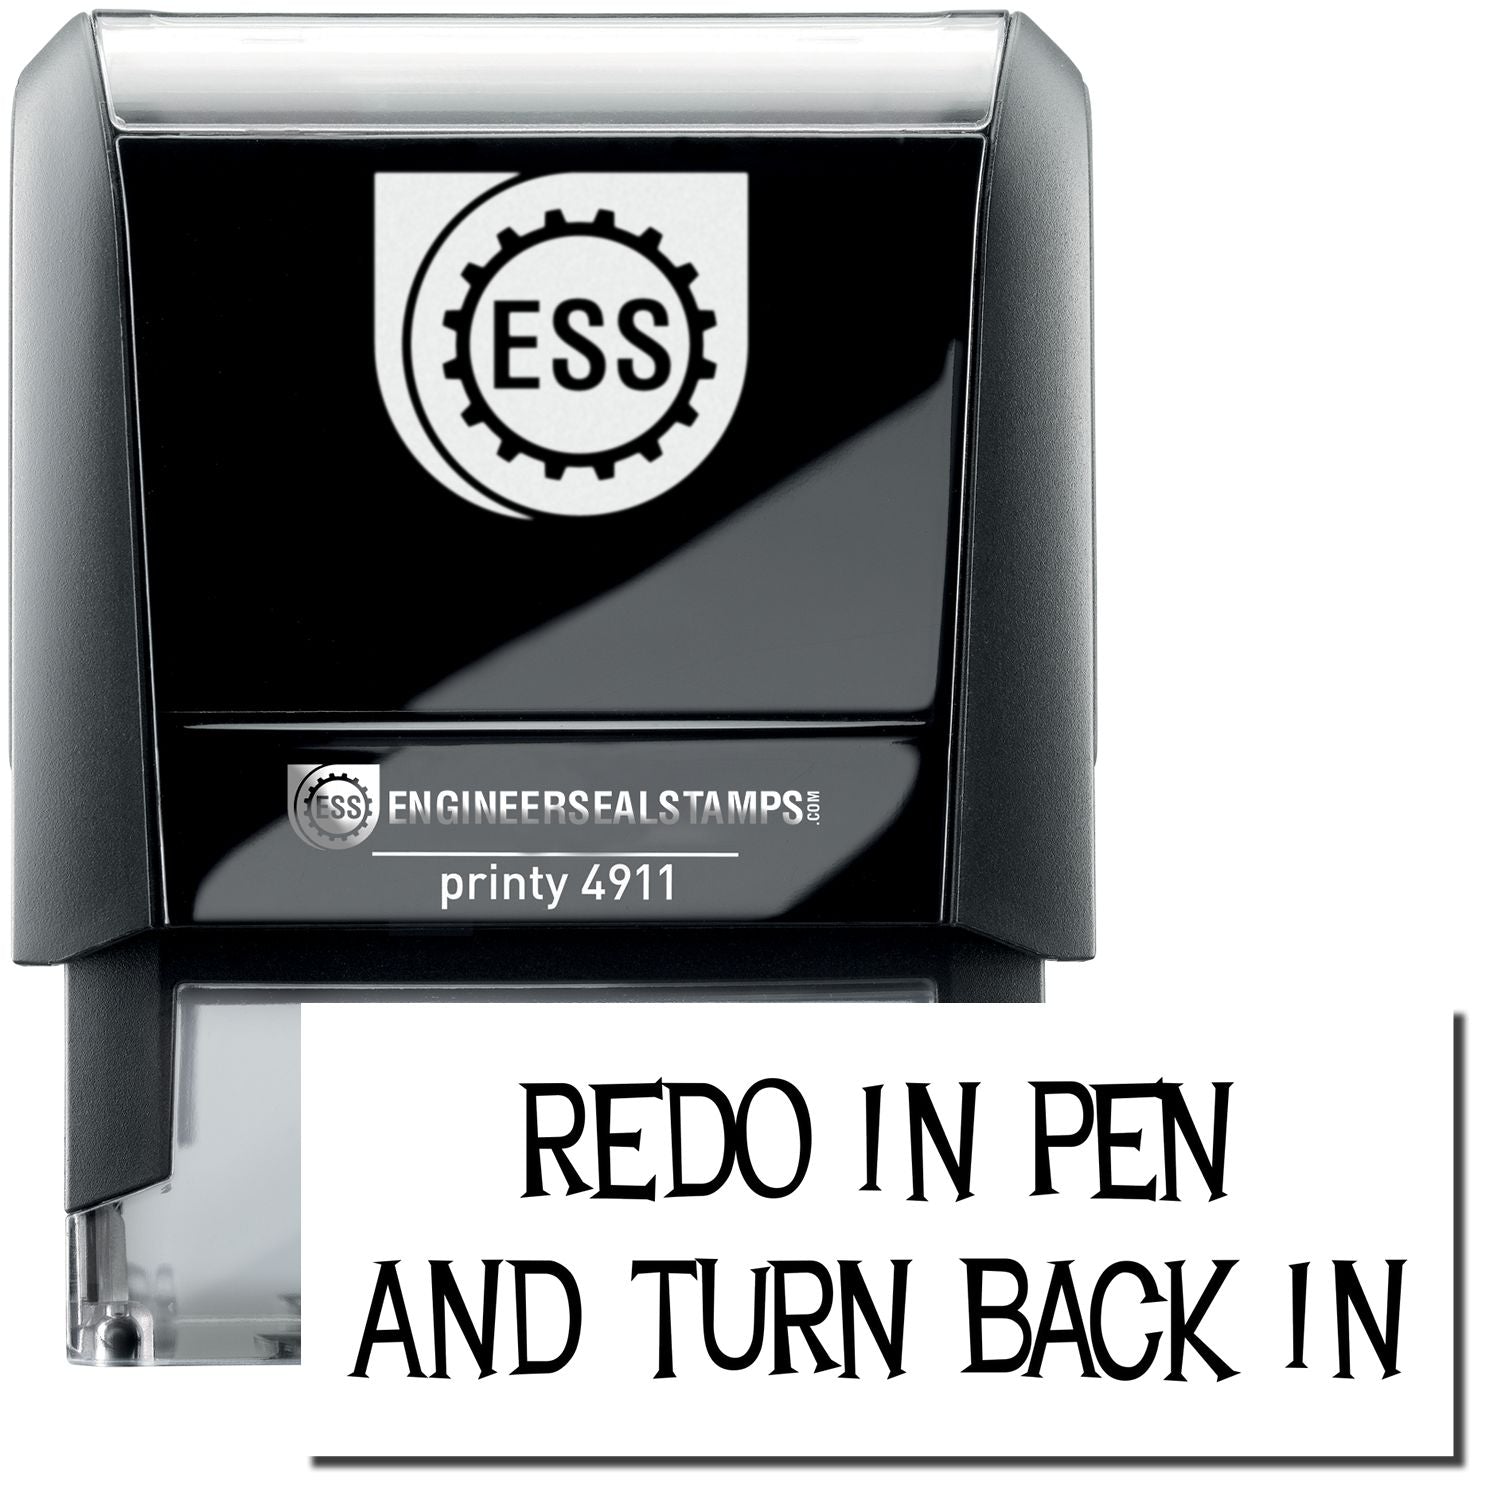 A self-inking stamp with a stamped image showing how the text "REDO IN PEN AND TURN BACK IN" is displayed after stamping.